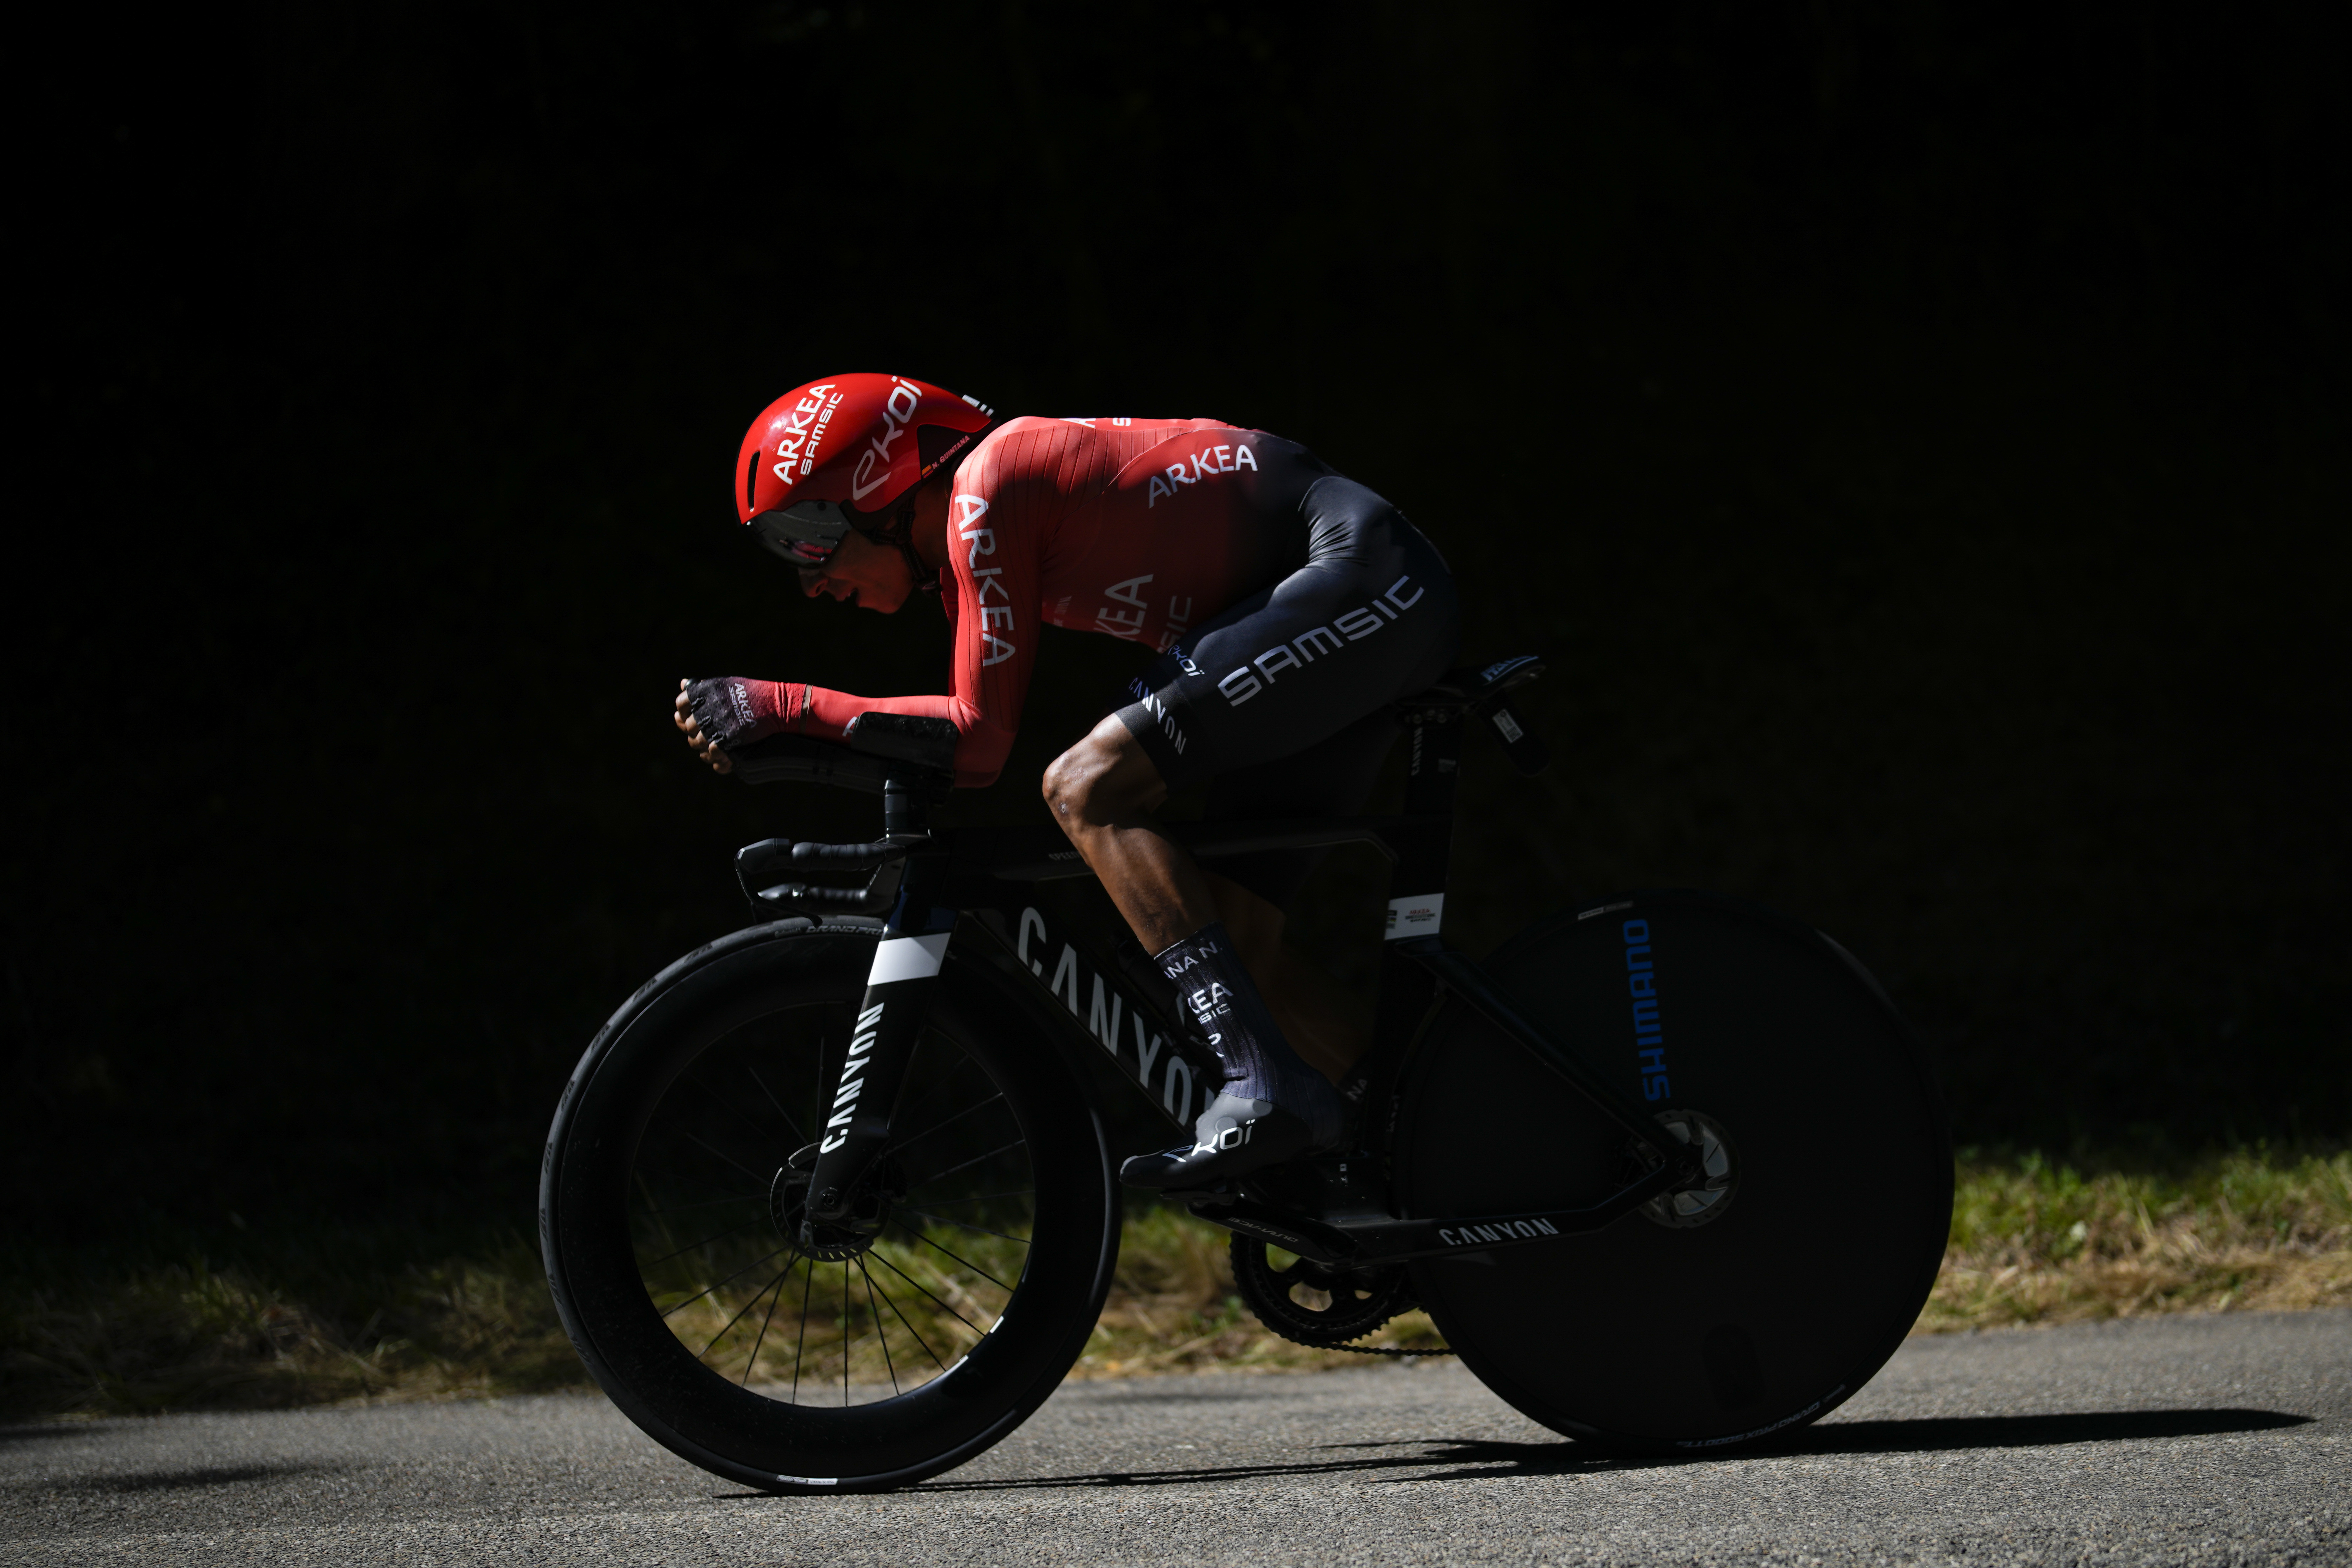 Colombia's Nairo Quintana competes during the twentieth stage of the Tour de France cycling race, an individual time trial over 40.7 kilometers (25.3 miles) with start in Lacapelle-Marival and finish in Rocamadour, France